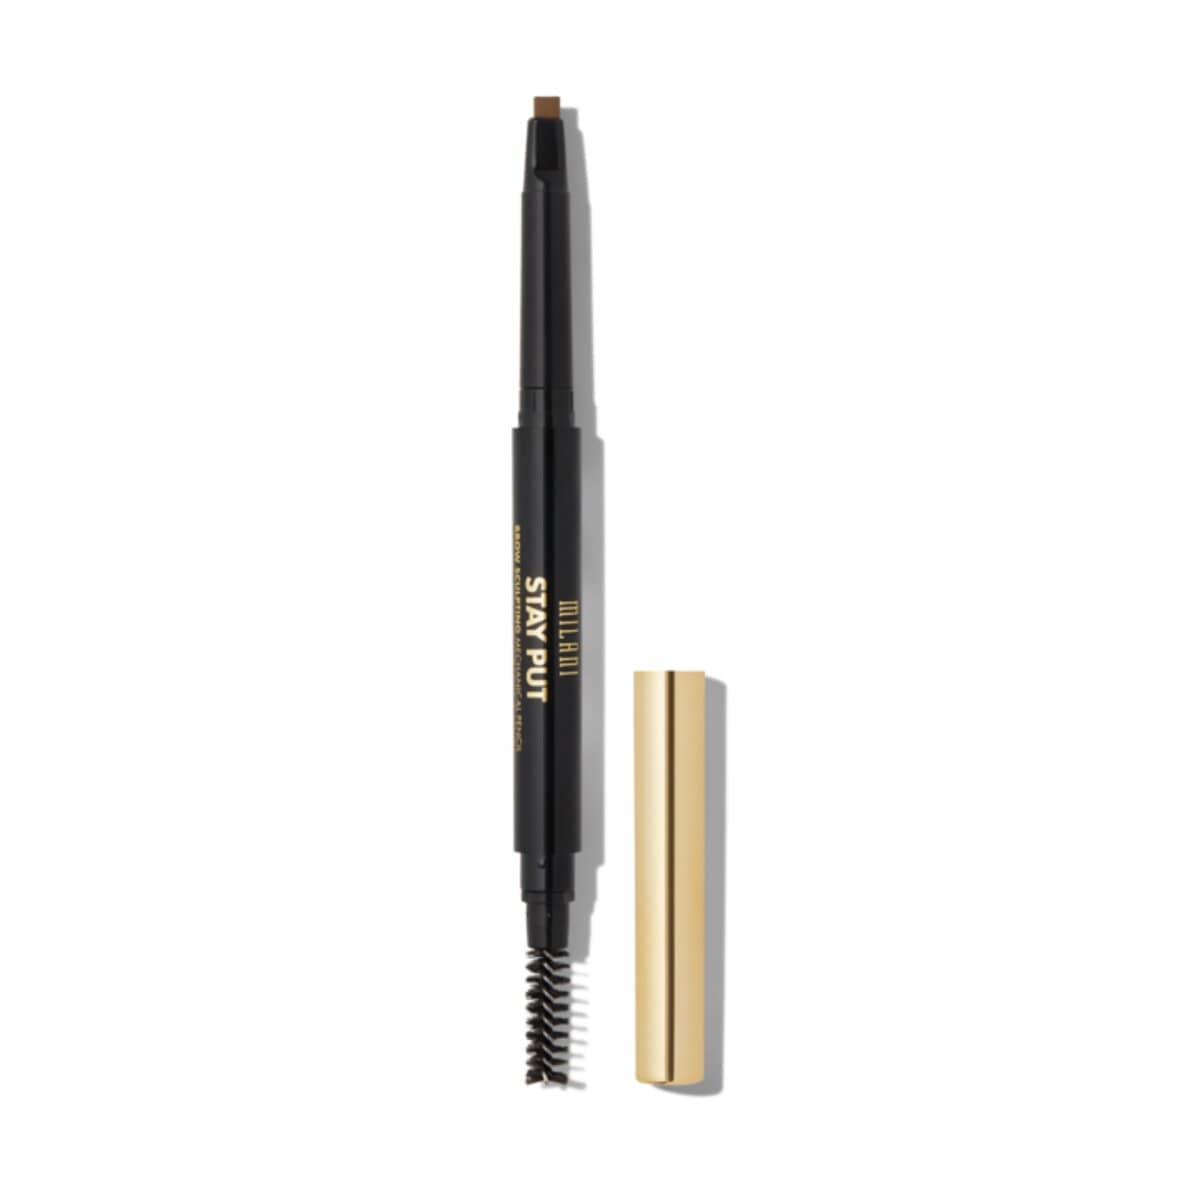 STAY PUT BROW SCULPTING MECHANICAL PENCIL SOFT BROWN - MILANI